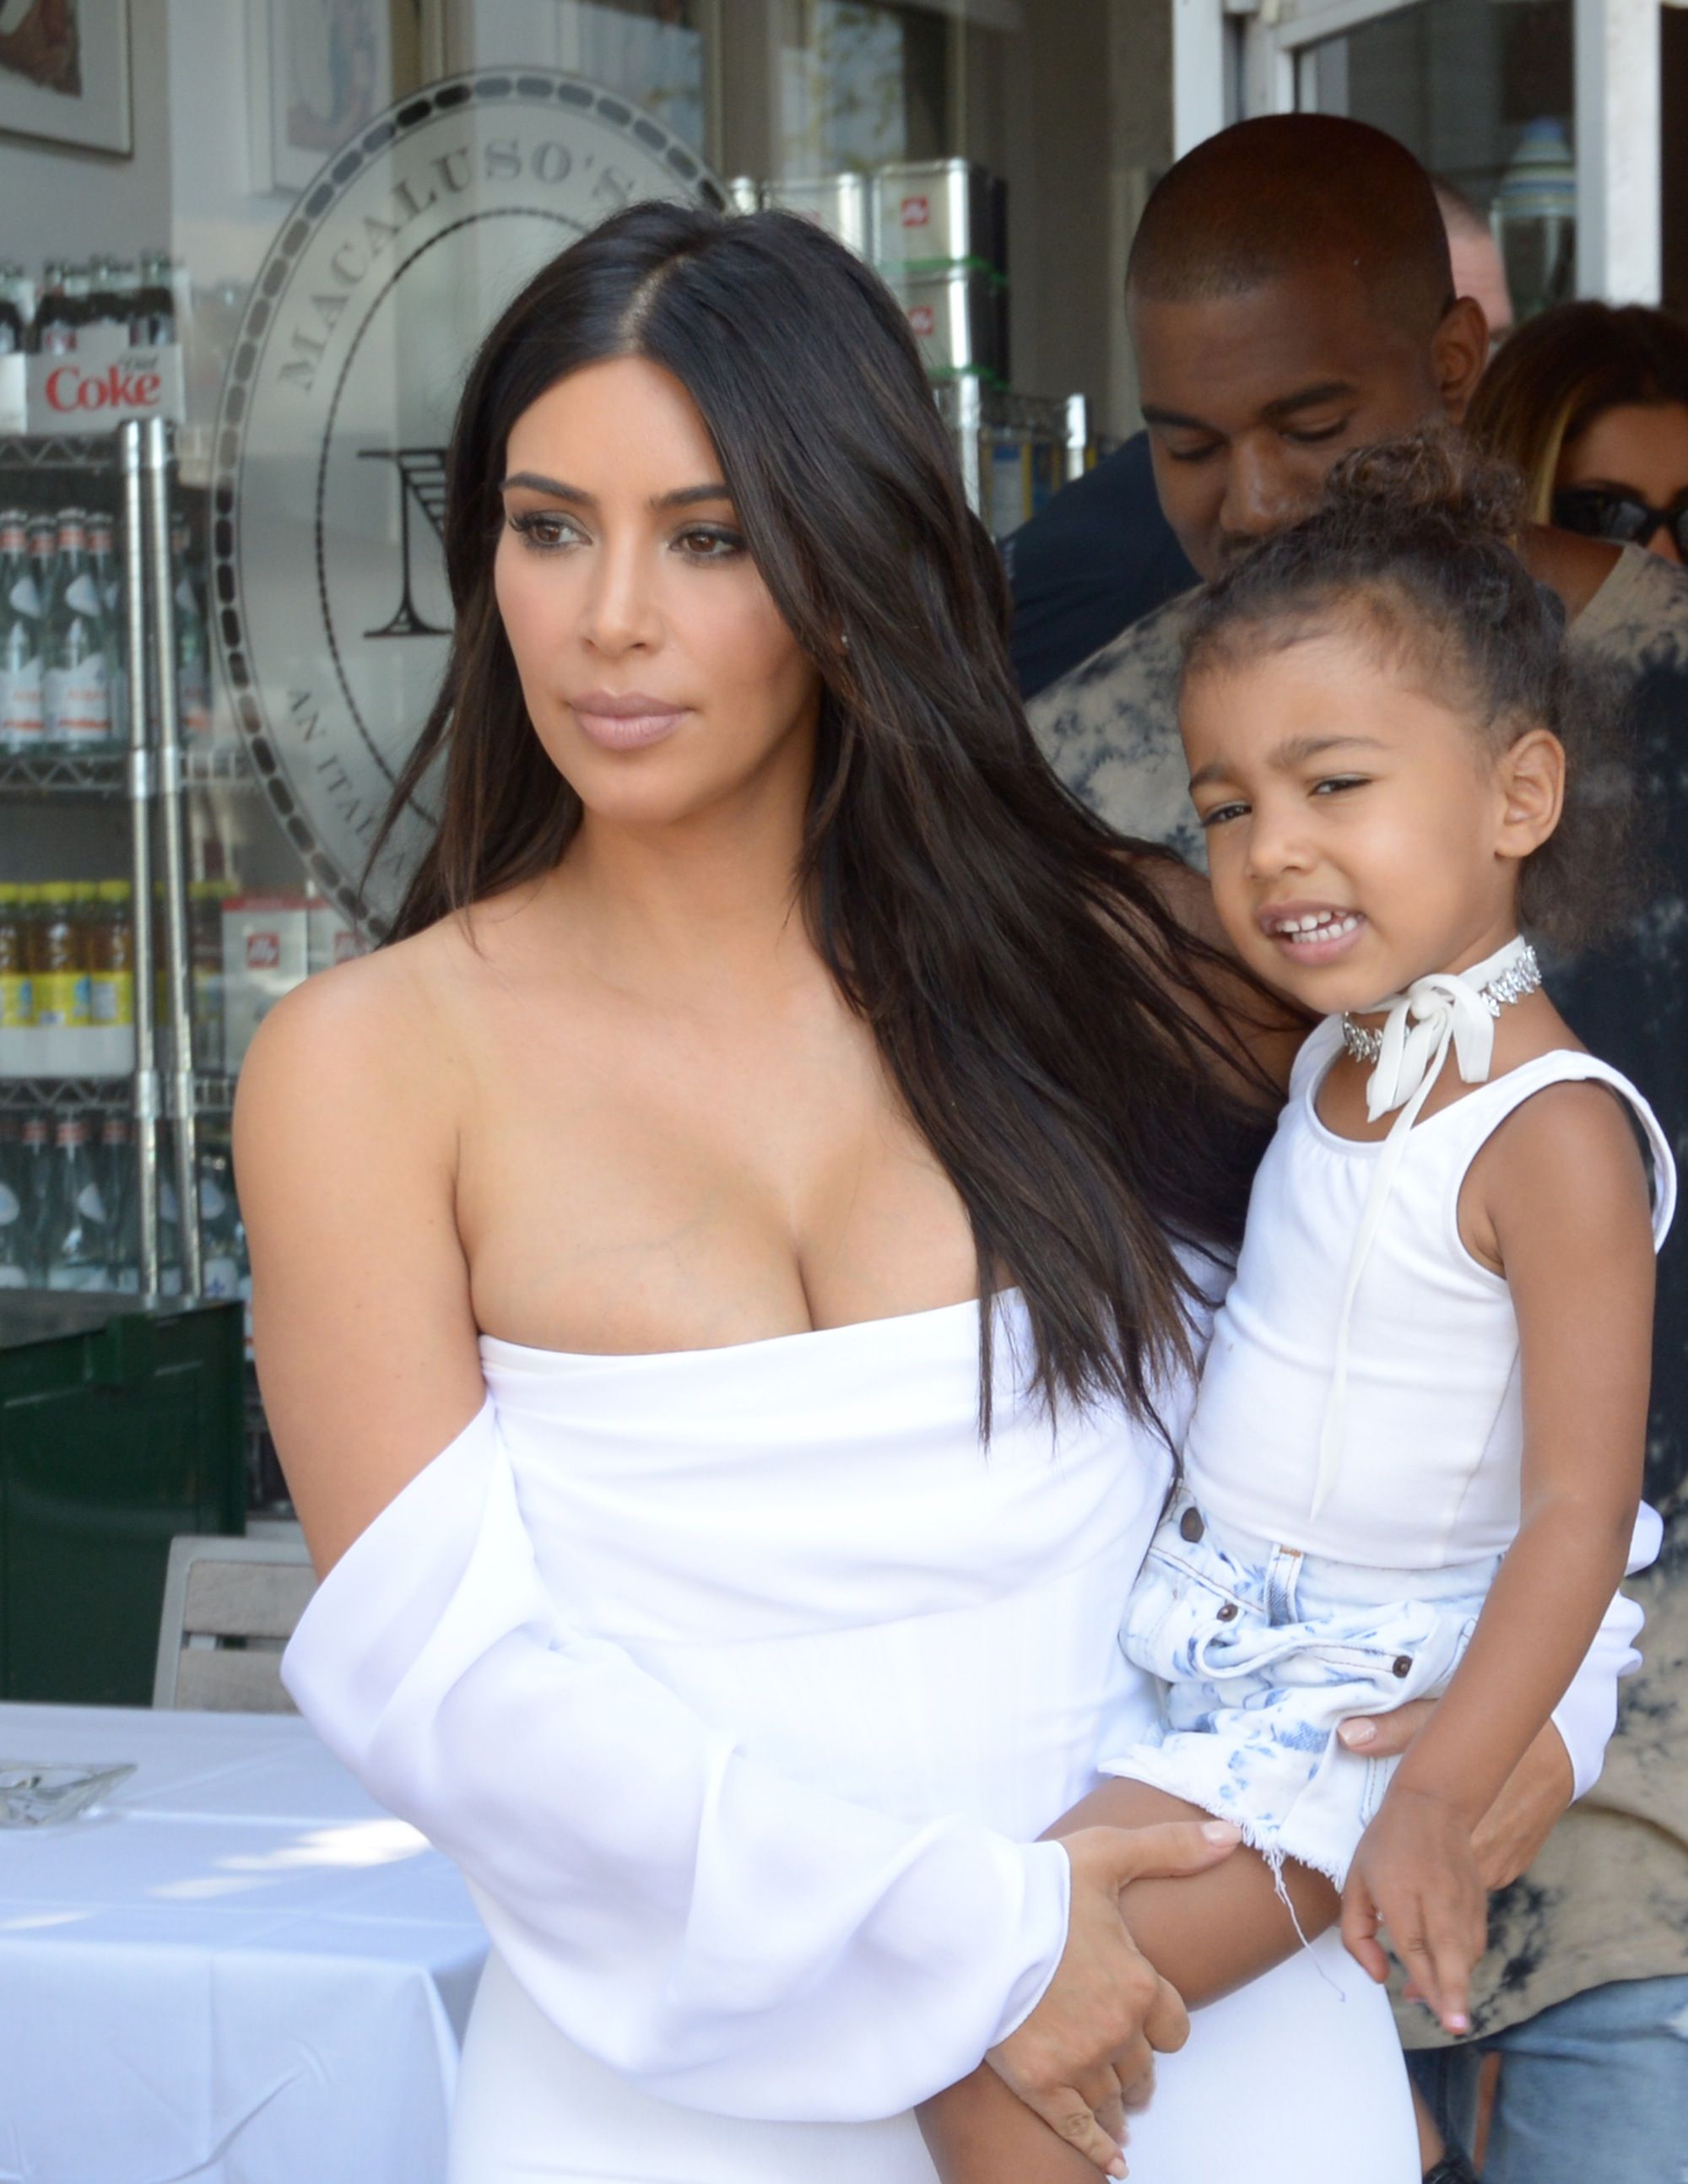 likhoa kim kardashian choked up when she first received a letter from her eldest daughter north west on kim s st birthday 6549f3cf9d4a1 Kim Kardashian Choked Up When She First Received A Letter From Her Eldest Daughter North West On Kim's 43st Birthday